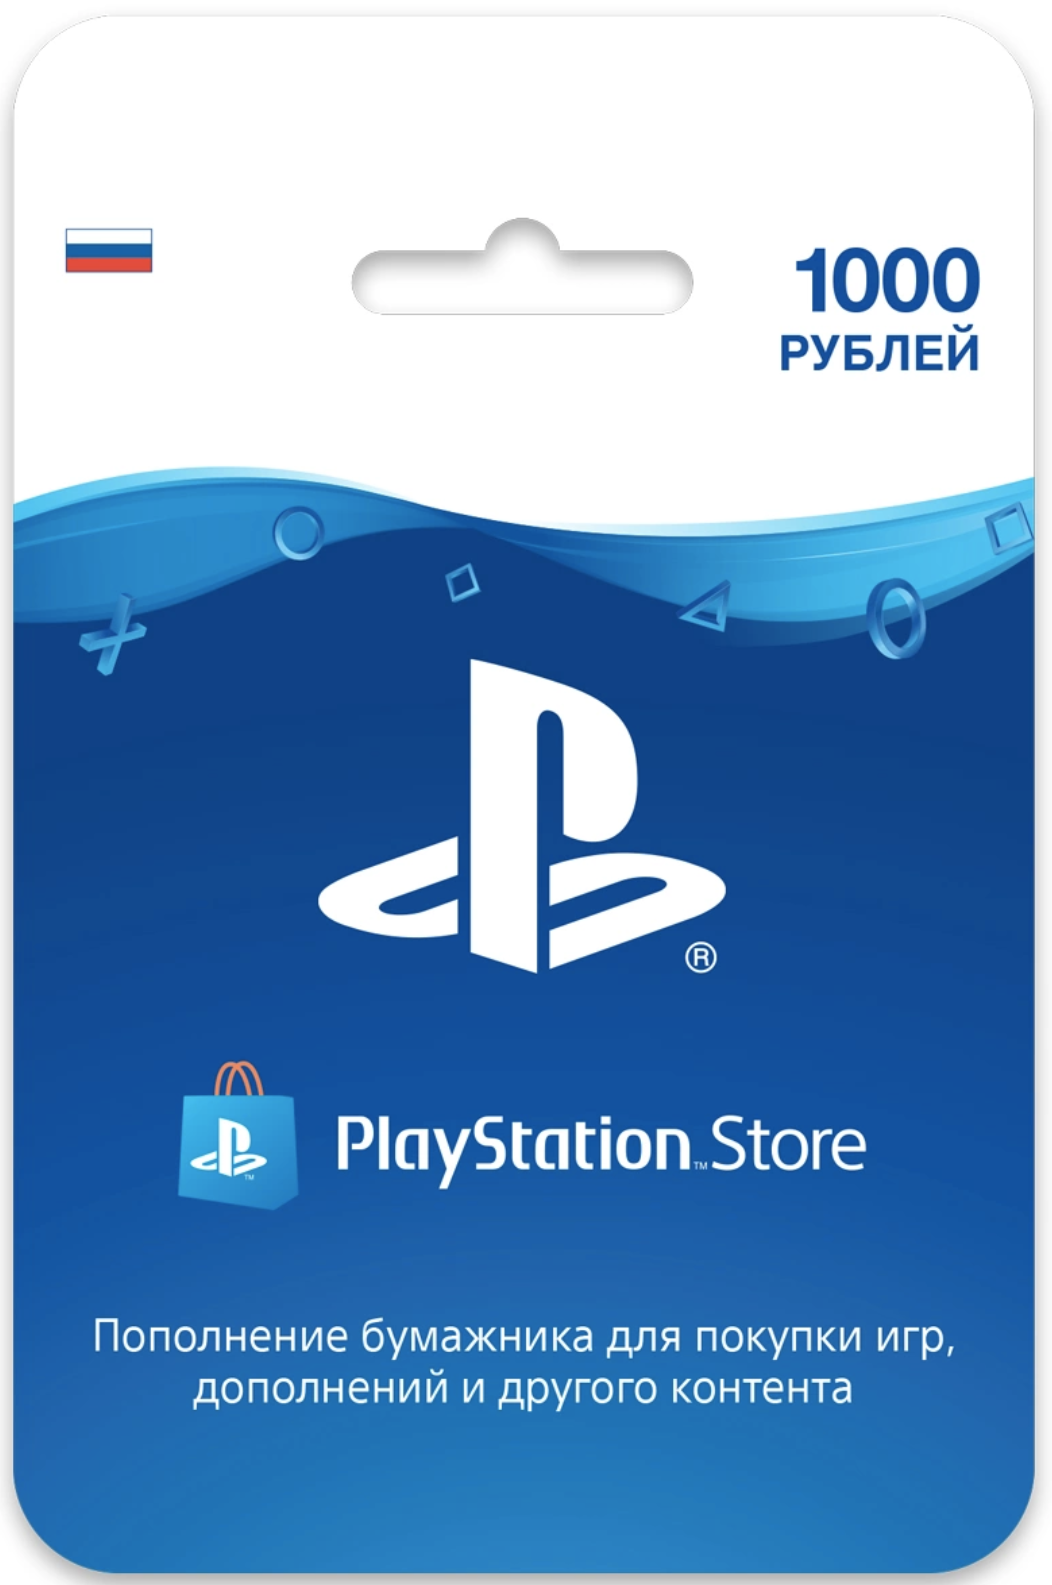 Payment card PlayStation Network (PSN) 1000 rubles (RU)